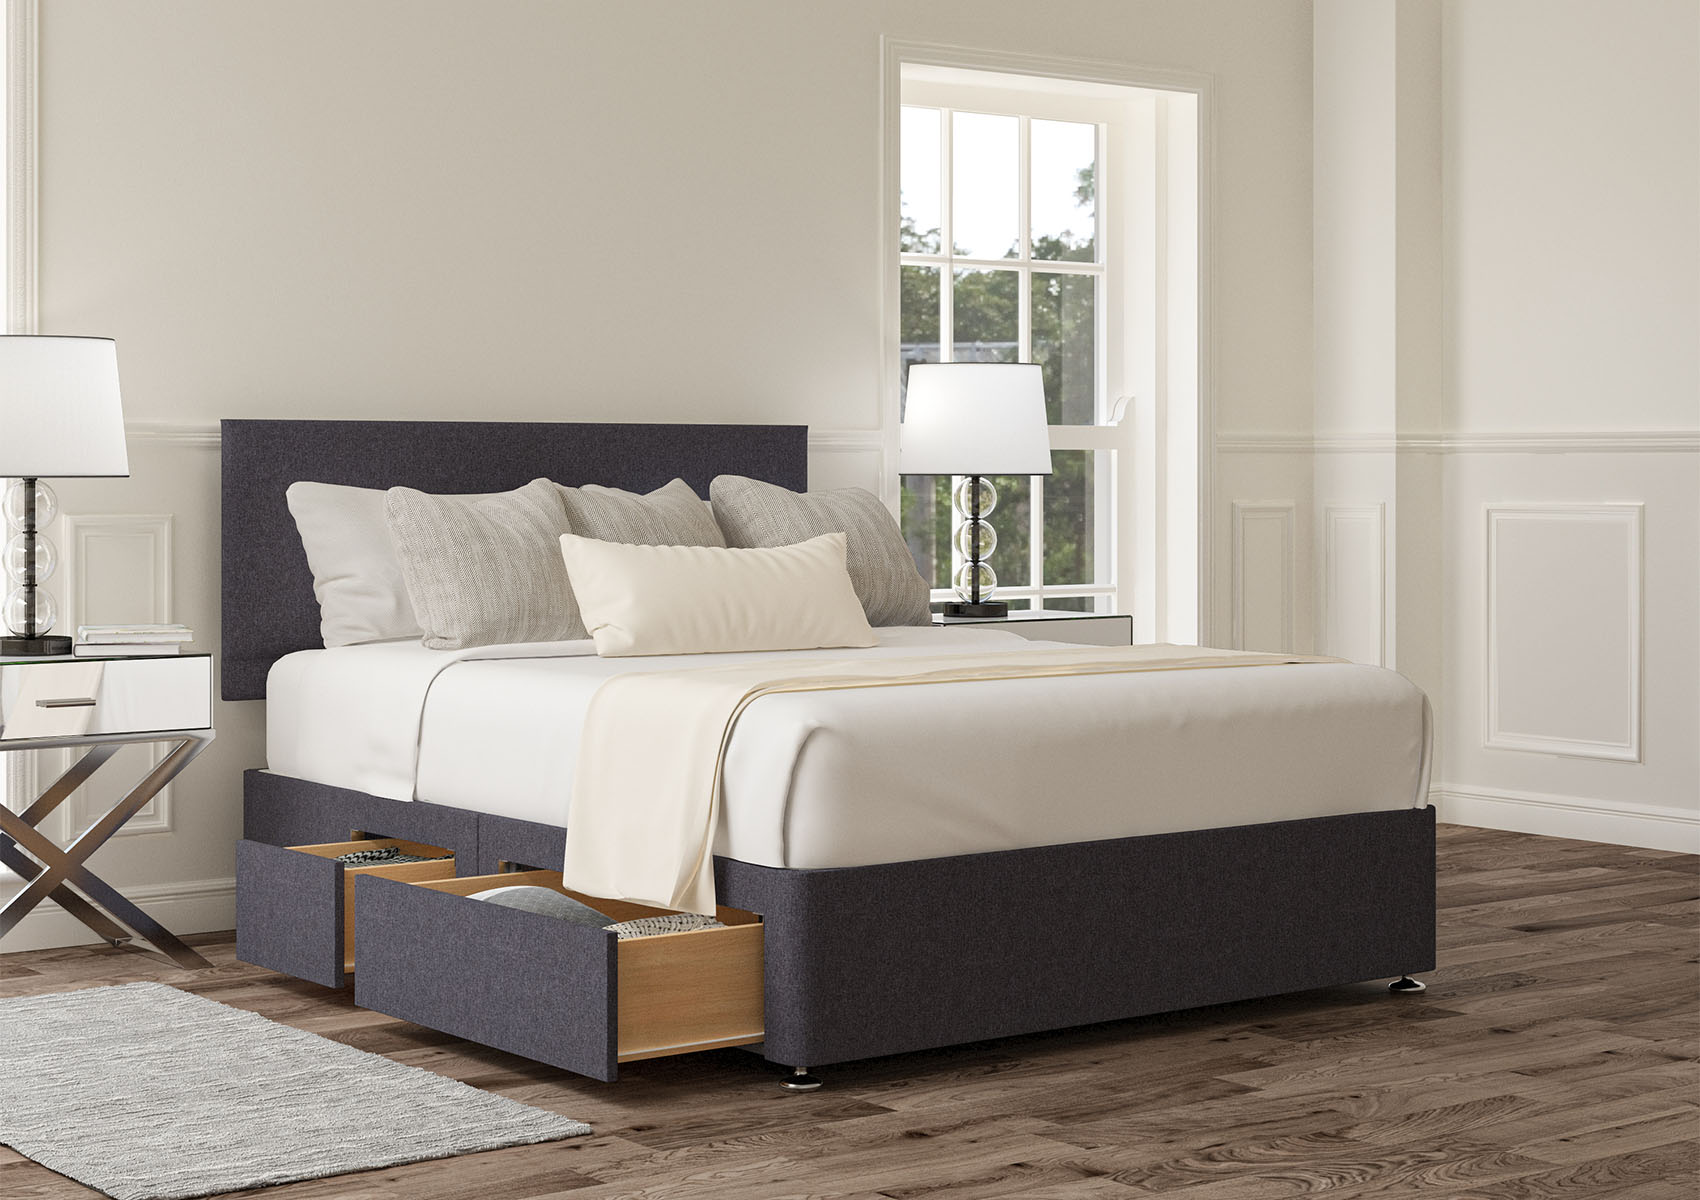 View Henley Siera Silver Upholstered King Size Divan Bed Time4Sleep information